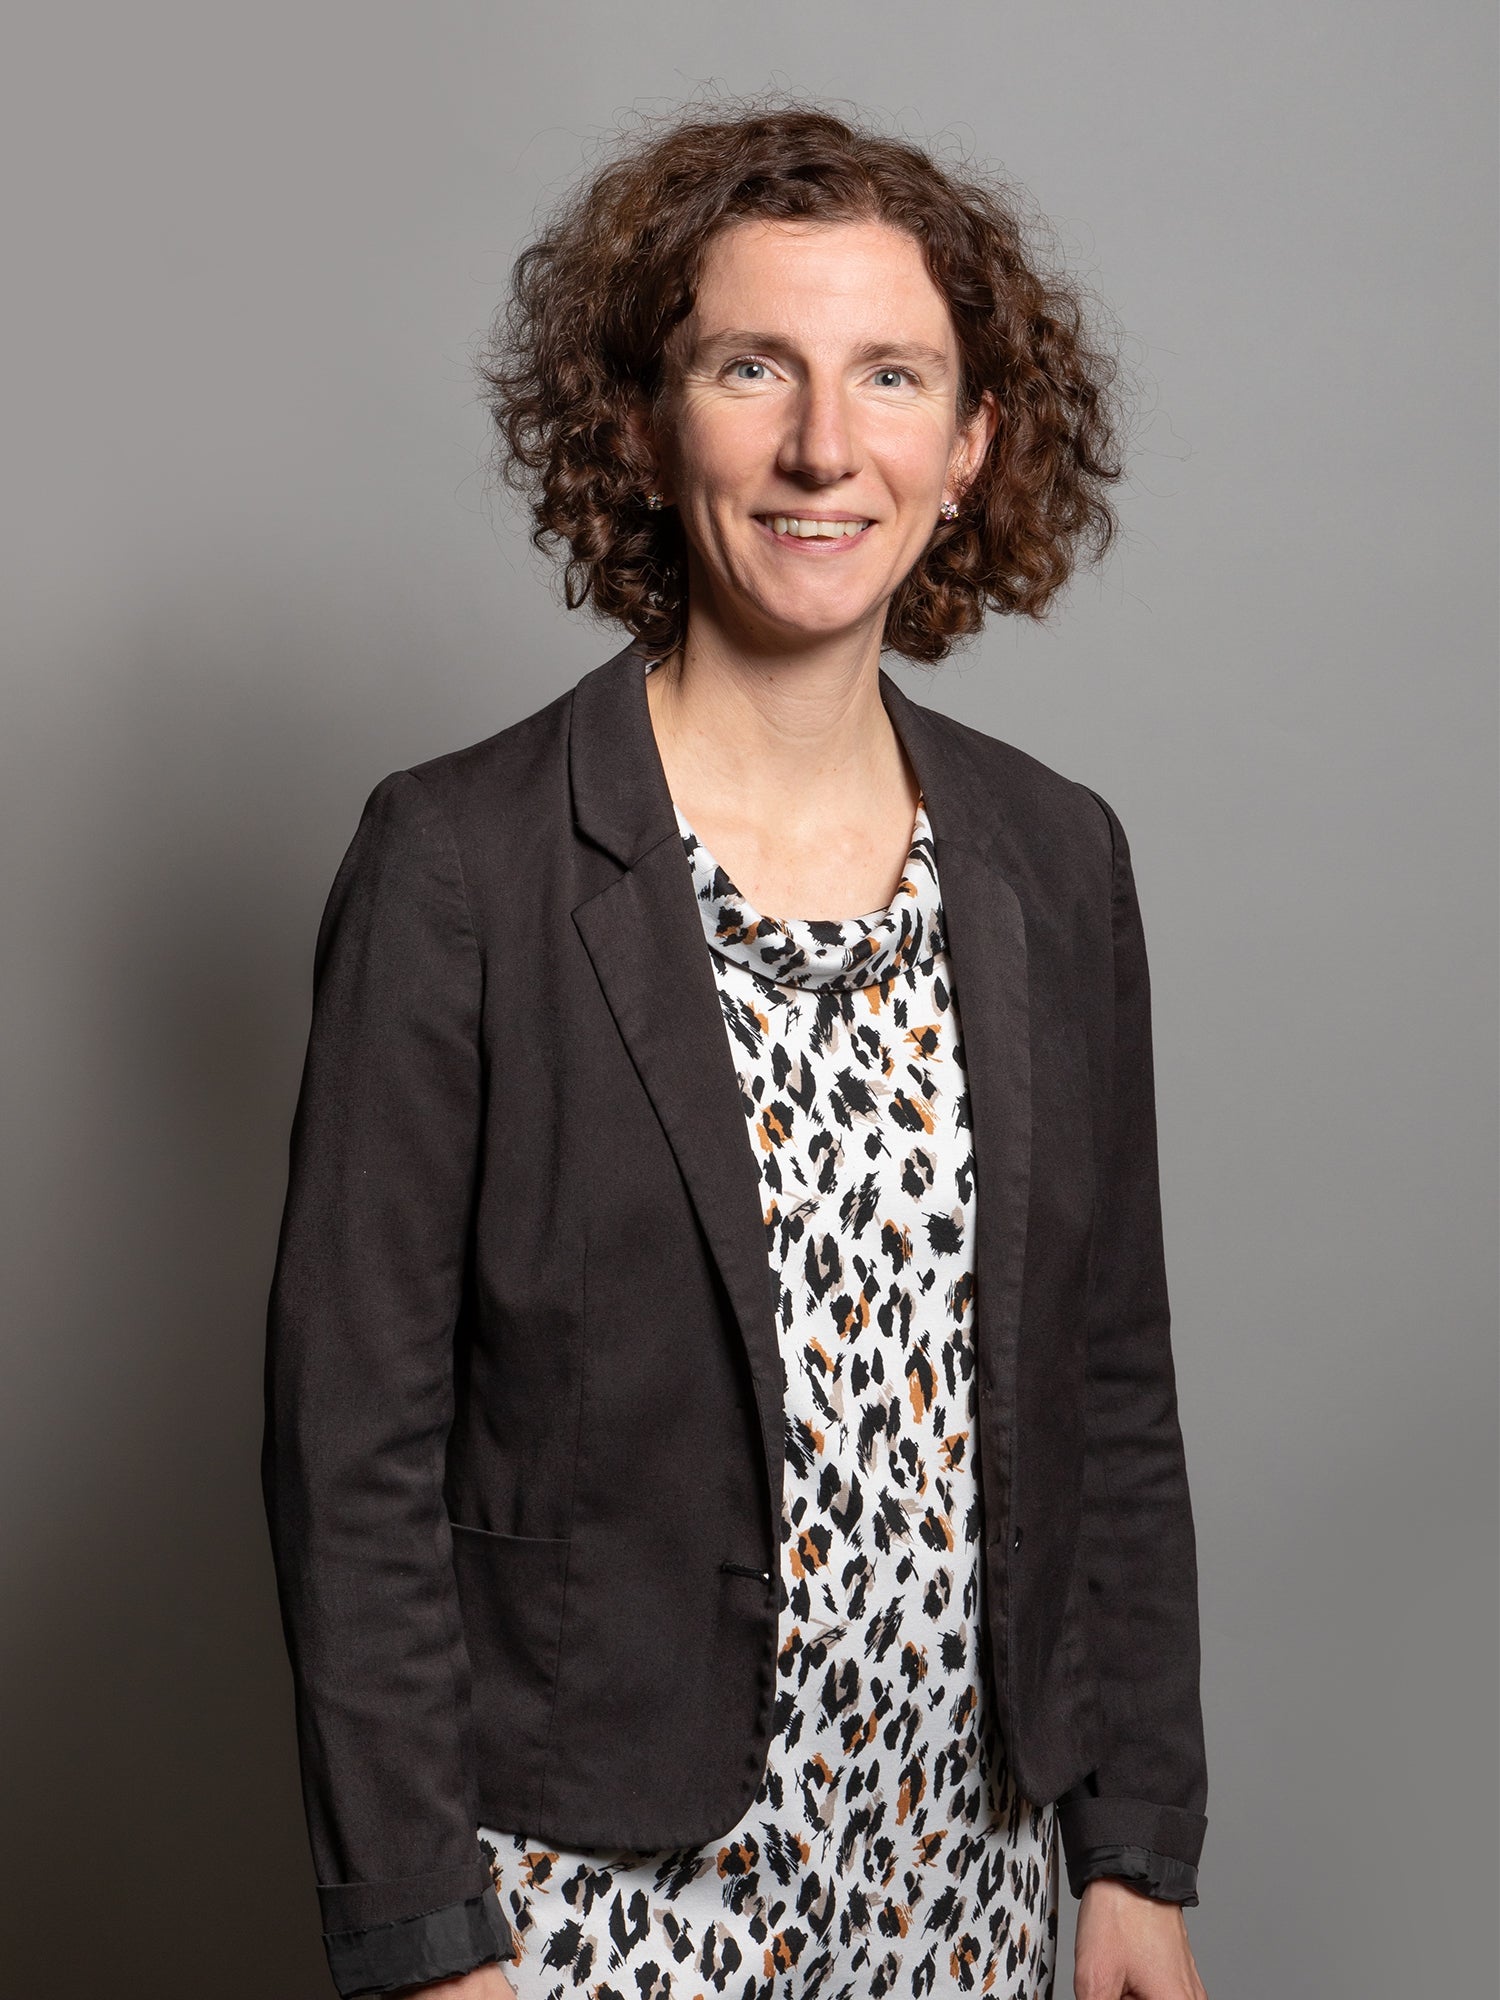 Anneliese Dodds, Labour’s shadow chancellor, said loads would be a ‘relief’ to small businesses